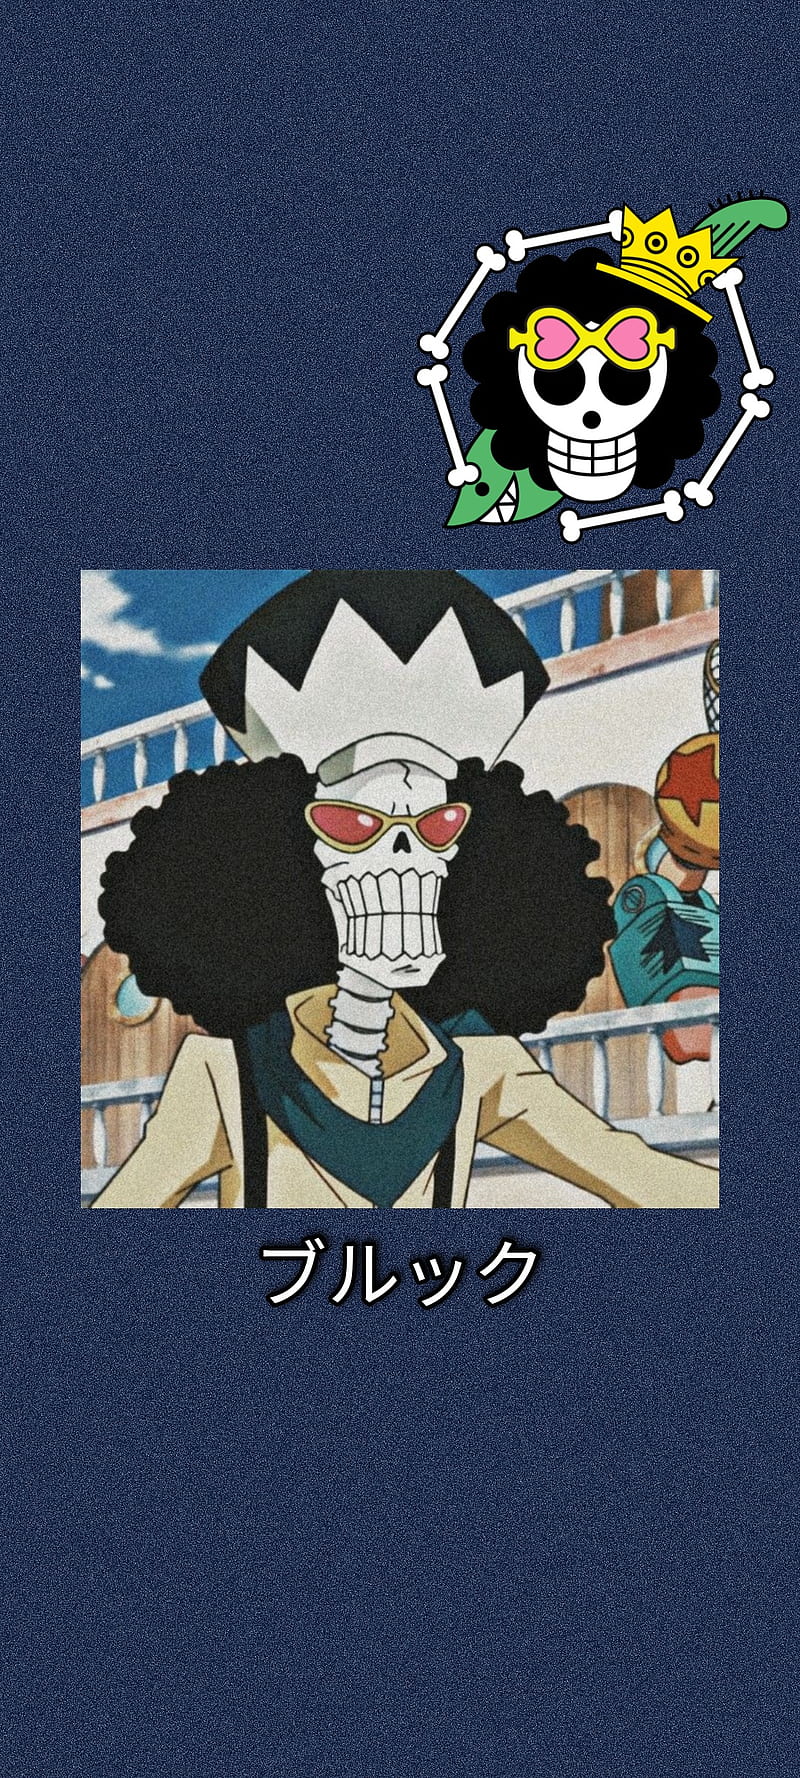 One Piece anime phone background with a skeleton character - One Piece